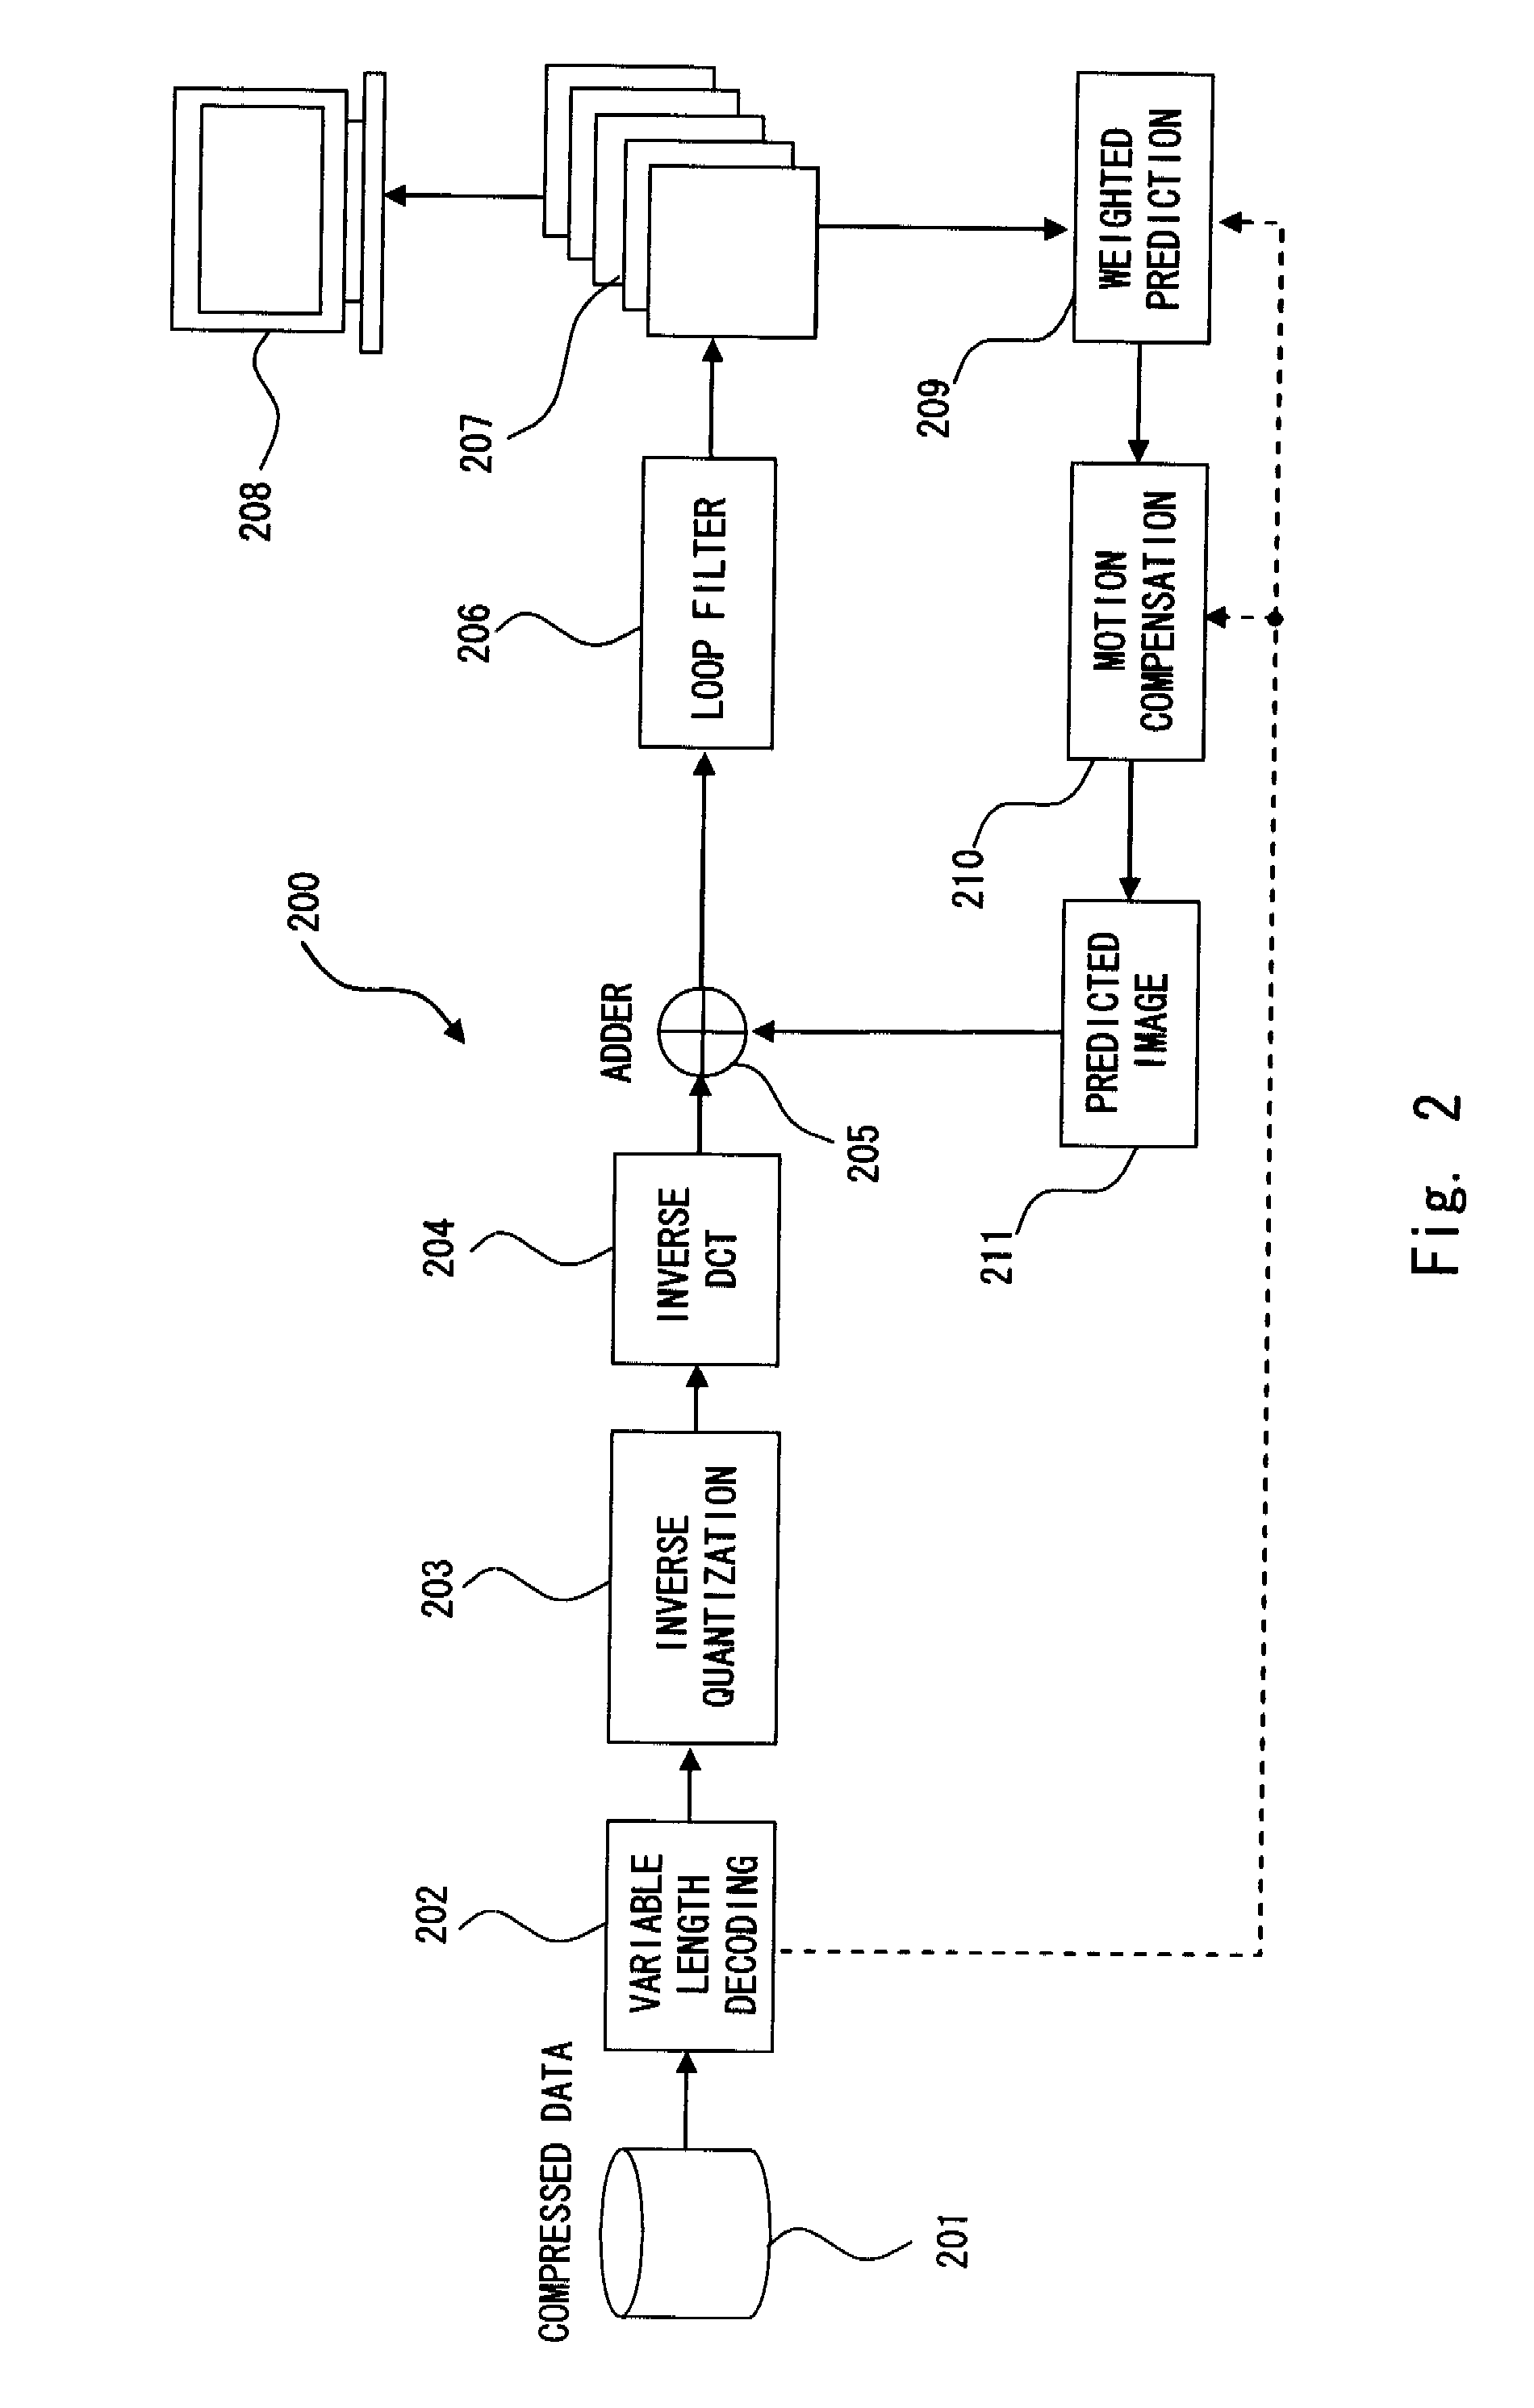 Filter operation unit and motion-compensating device